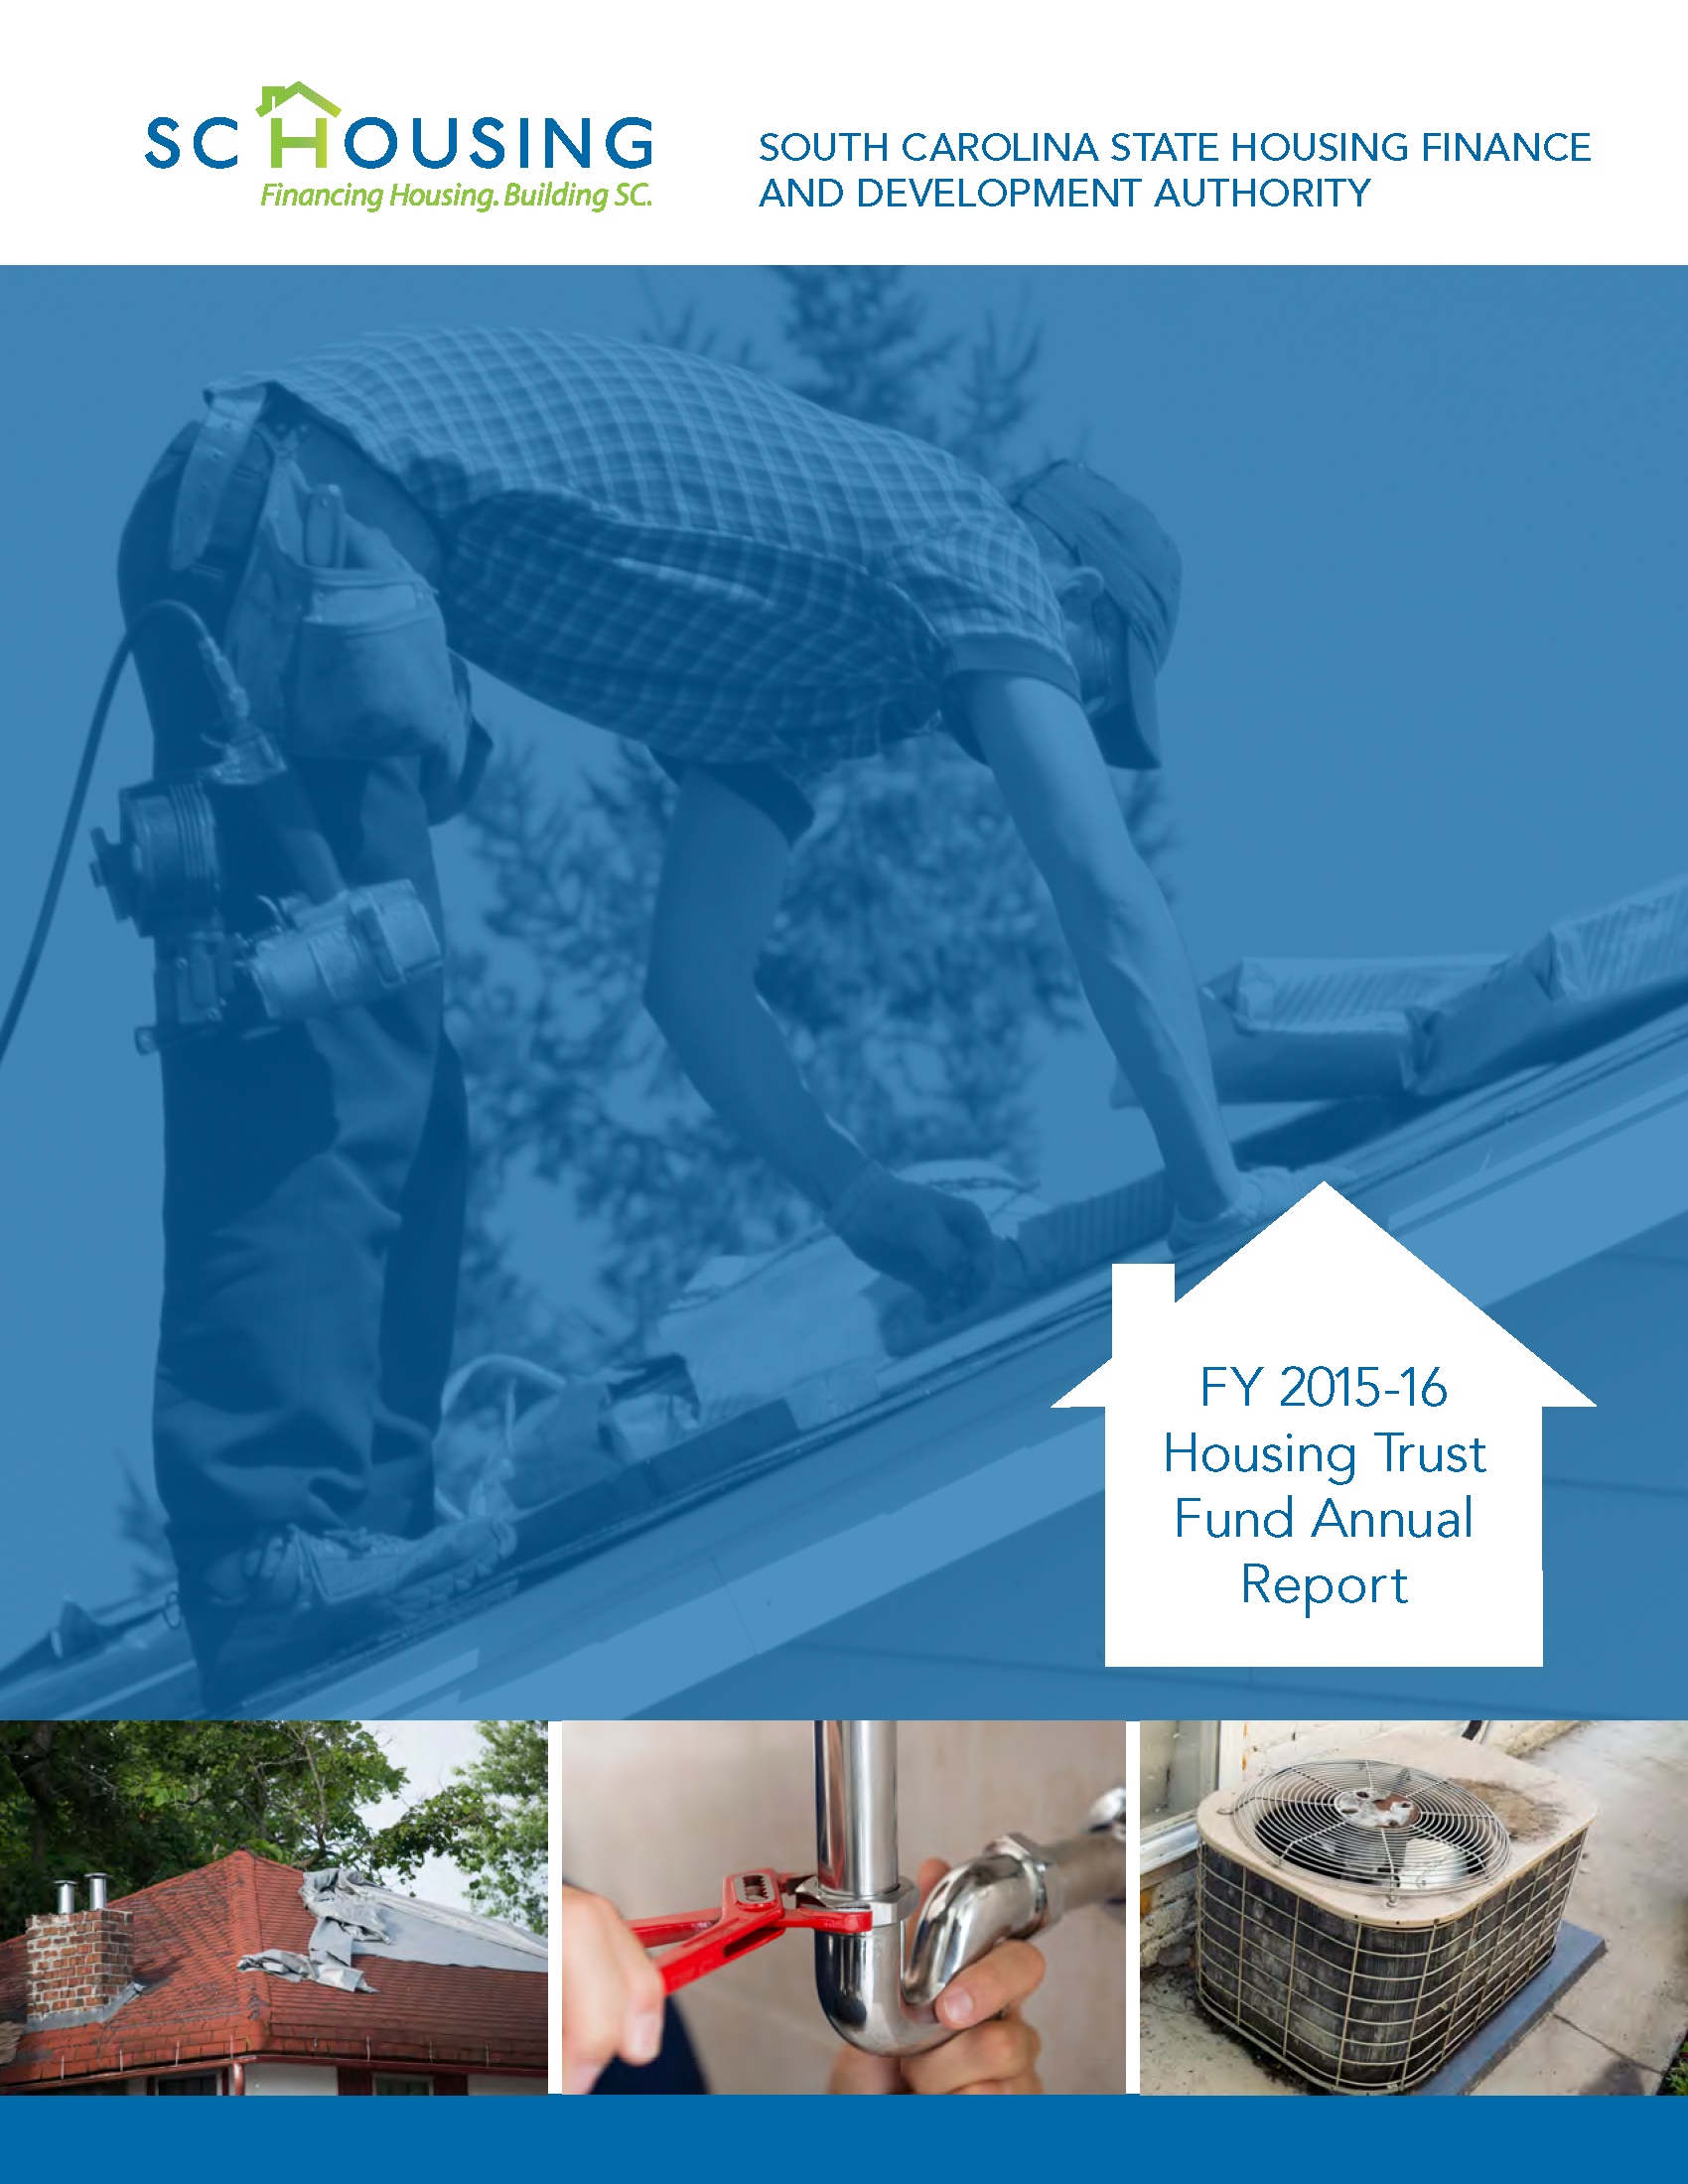 Housing Trust Fund Report for Fiscal Year 2016